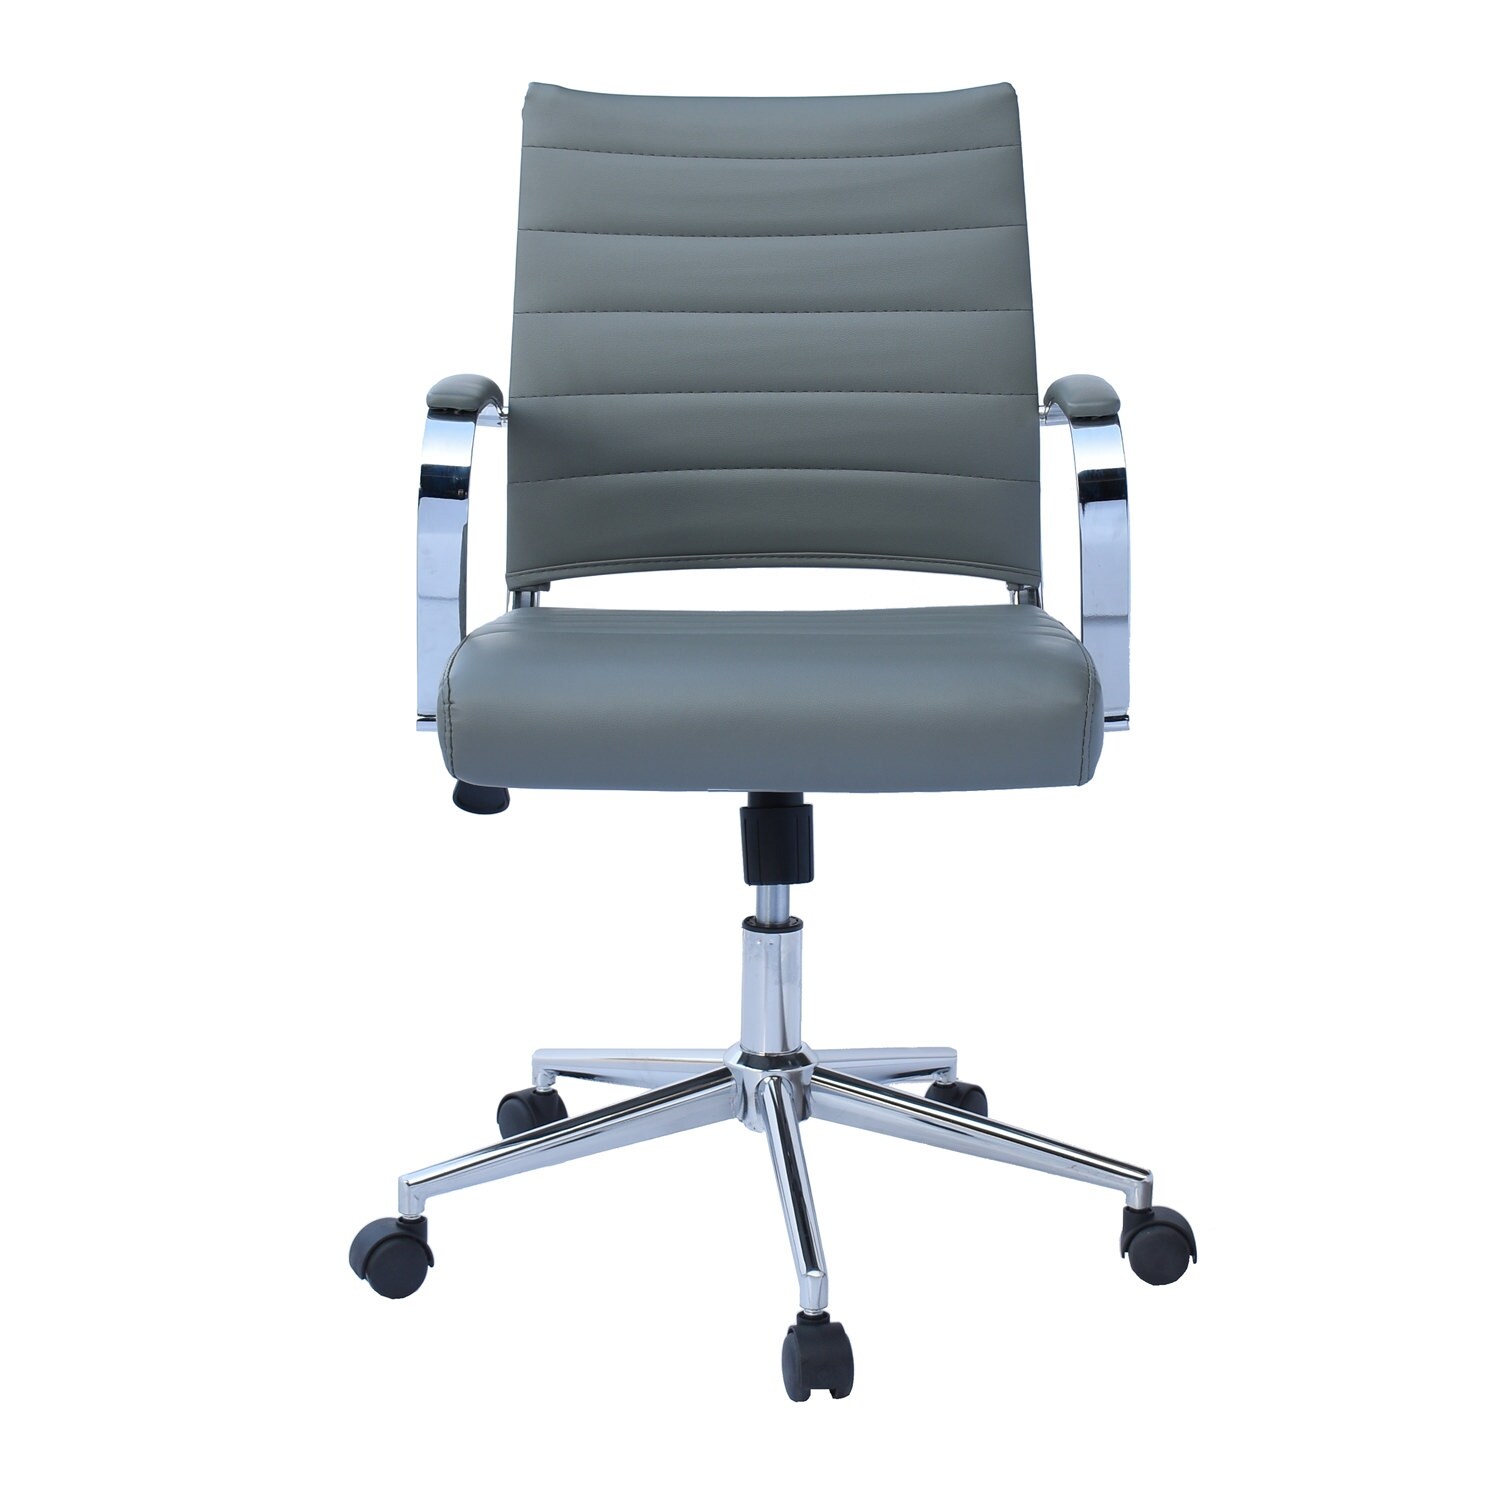 https://ak1.ostkcdn.com/images/products/is/images/direct/a22397d874ee101cfaab550330c982b924421cad/Modern-Office-Chair%2C-Executive-Mid-Back-Conference-Room-Chair-in-PU-Leather-with-Wheels-and-Arms.jpg